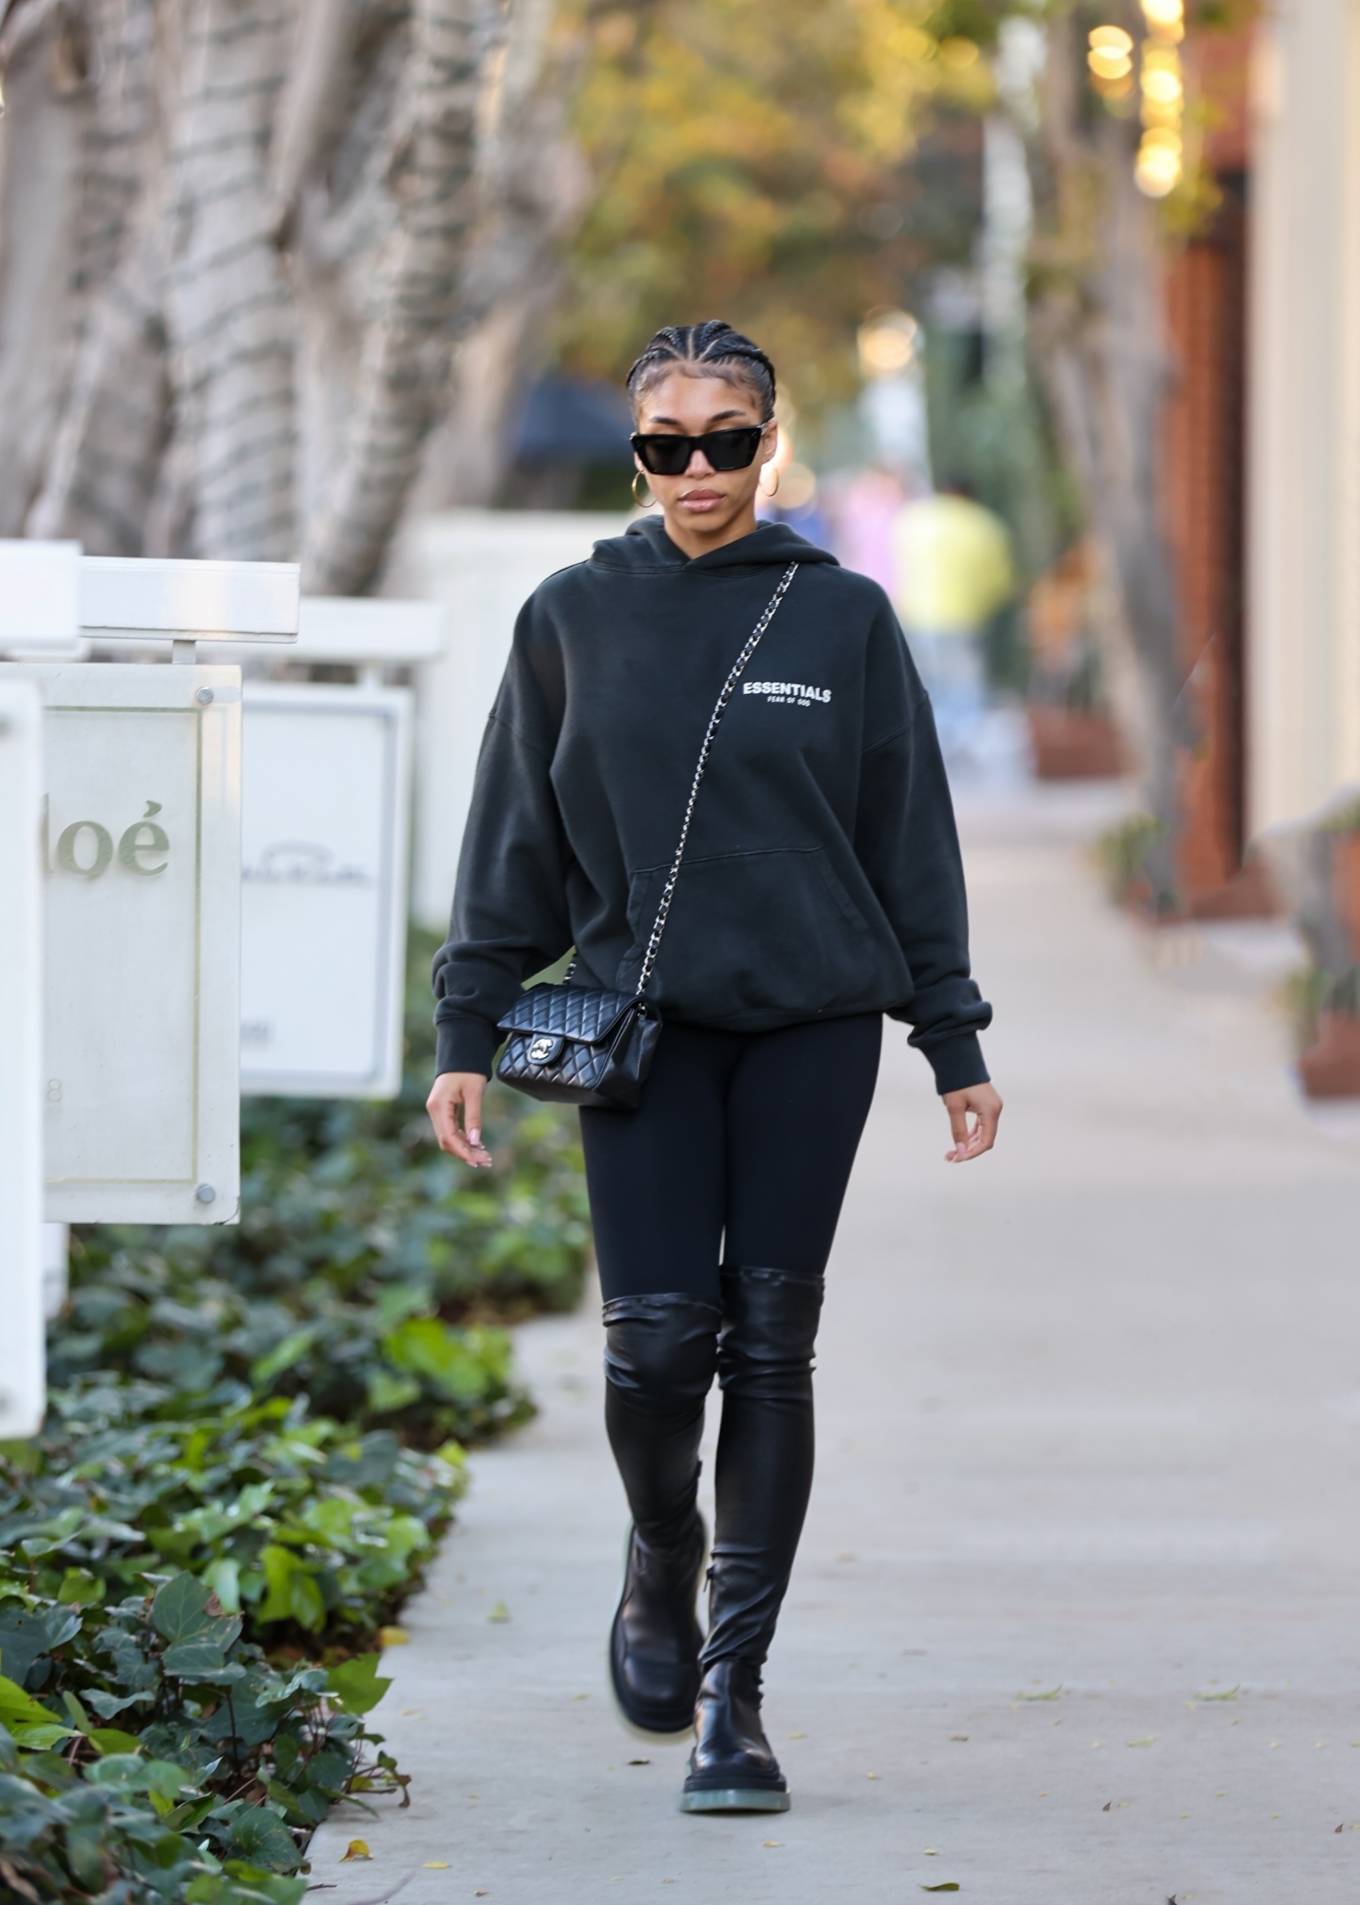 Lori Harvey 2022 : Lori Harvey – Wears thigh-high boots shopping on Melrose Place in West Hollywood 06.01.2022 -05